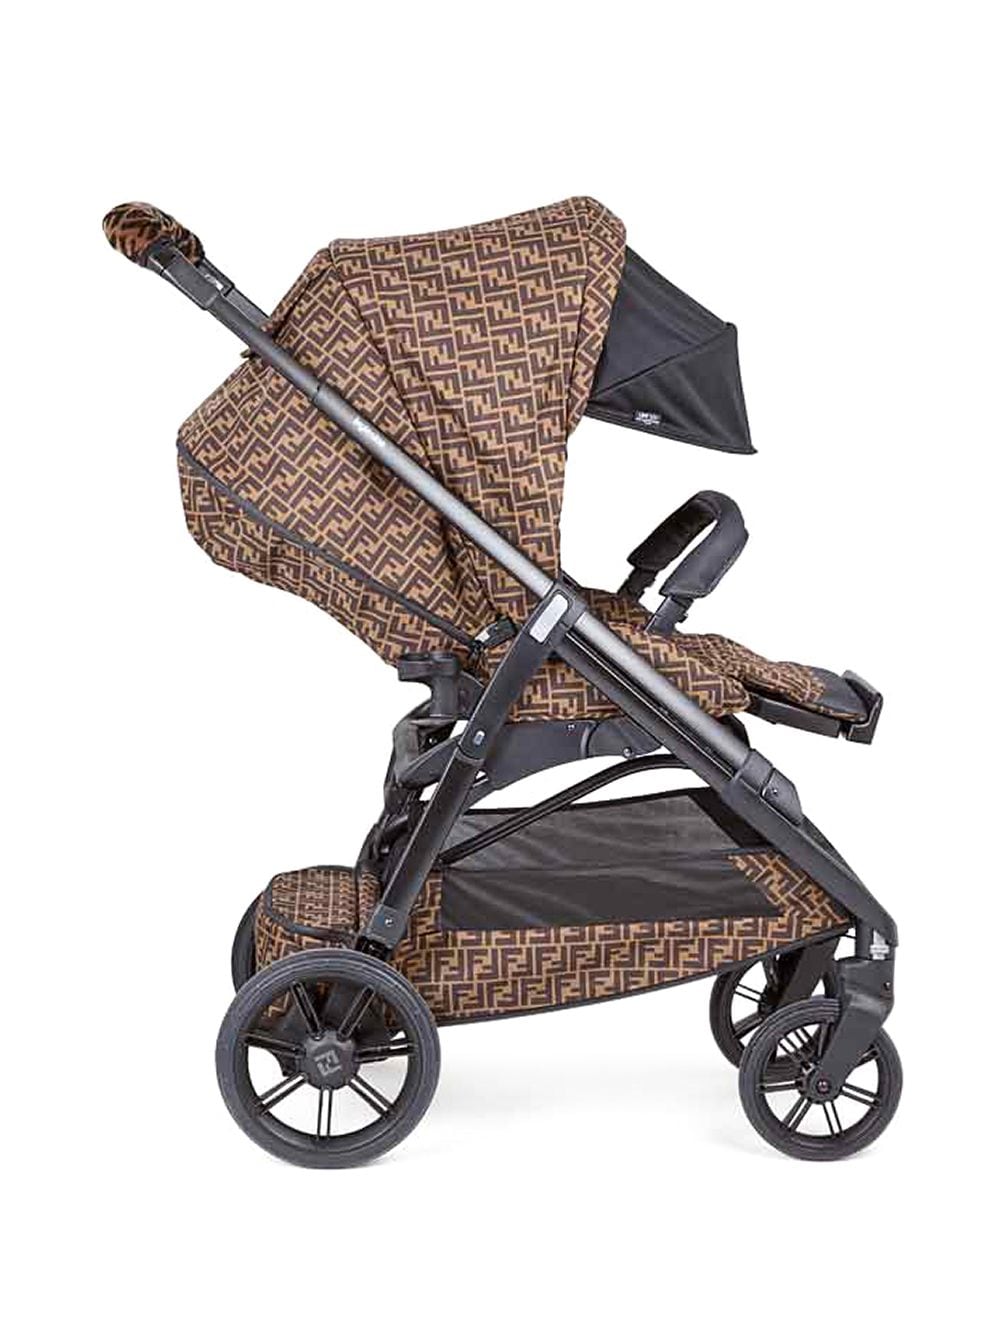 Brown and black baby stroller with logo